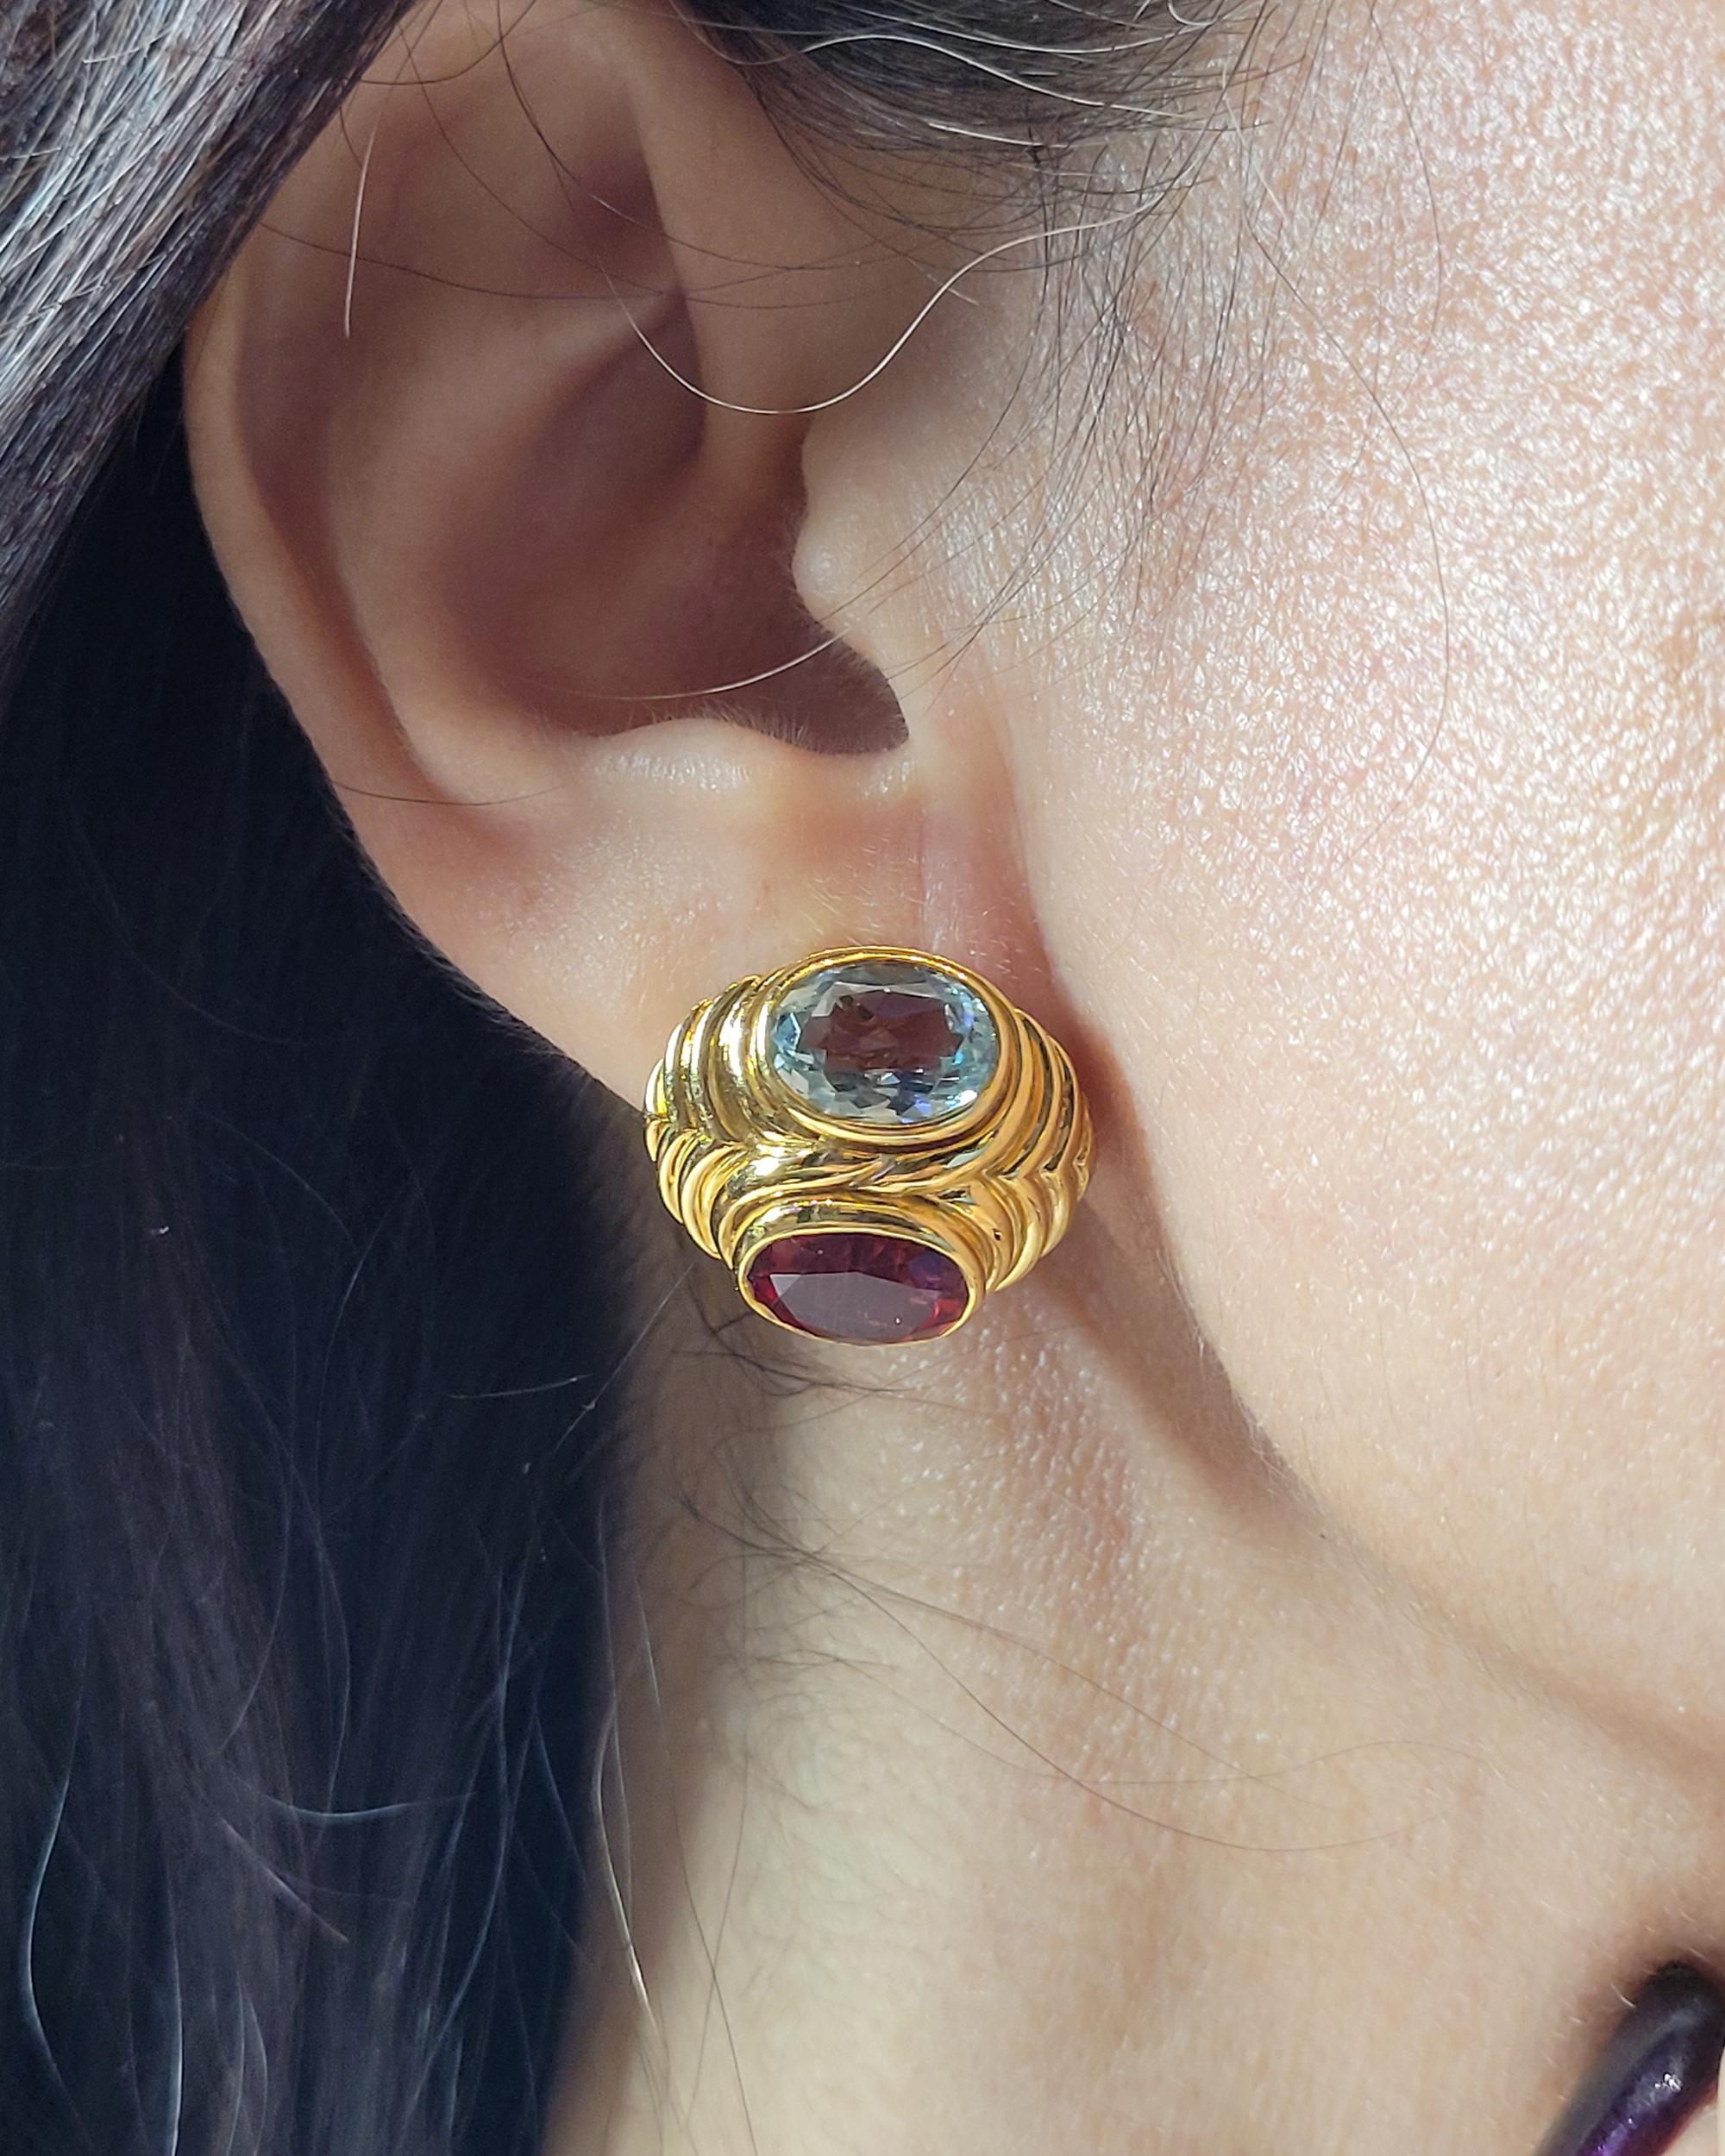 Beautiful earrings comprising of two oval London topaz stones and two oval rubelite stones mounted in 18k yellow gold.
Created by Bvlgari.
Weight of the earrings is 22.05 grams. 
Signed and numbered.

